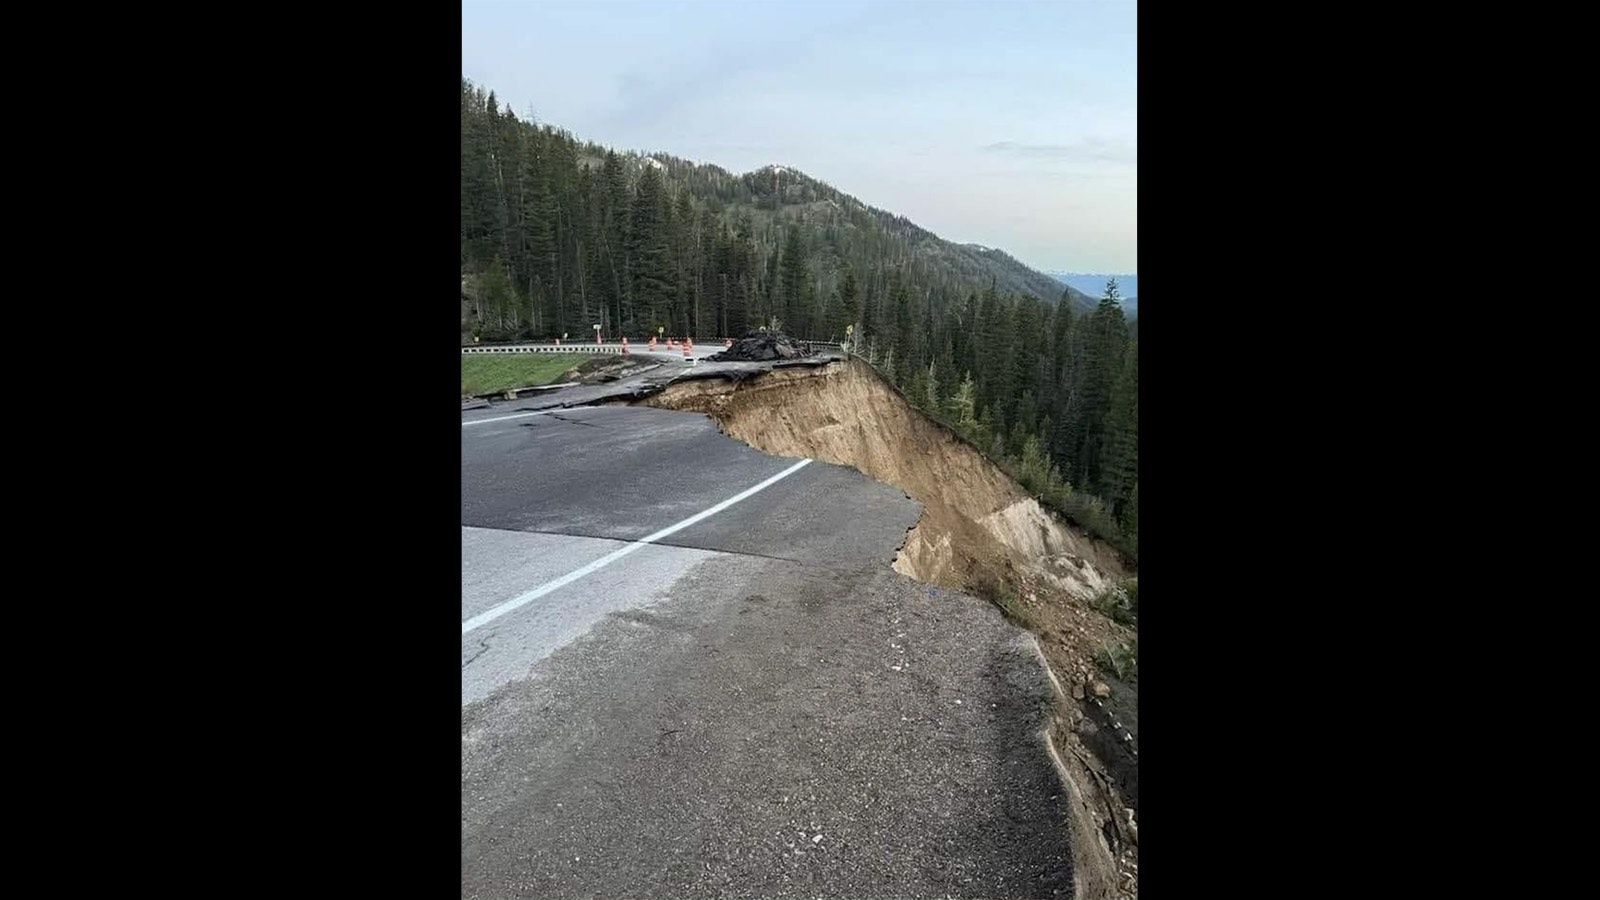 A “catastrophic failure” of Wyoming Highway 22 over Teton Pass overnight Friday saw a huge section wash down the mountain. A long closure of the “lifeline” between Jackson and Victor, Idaho, is expected.